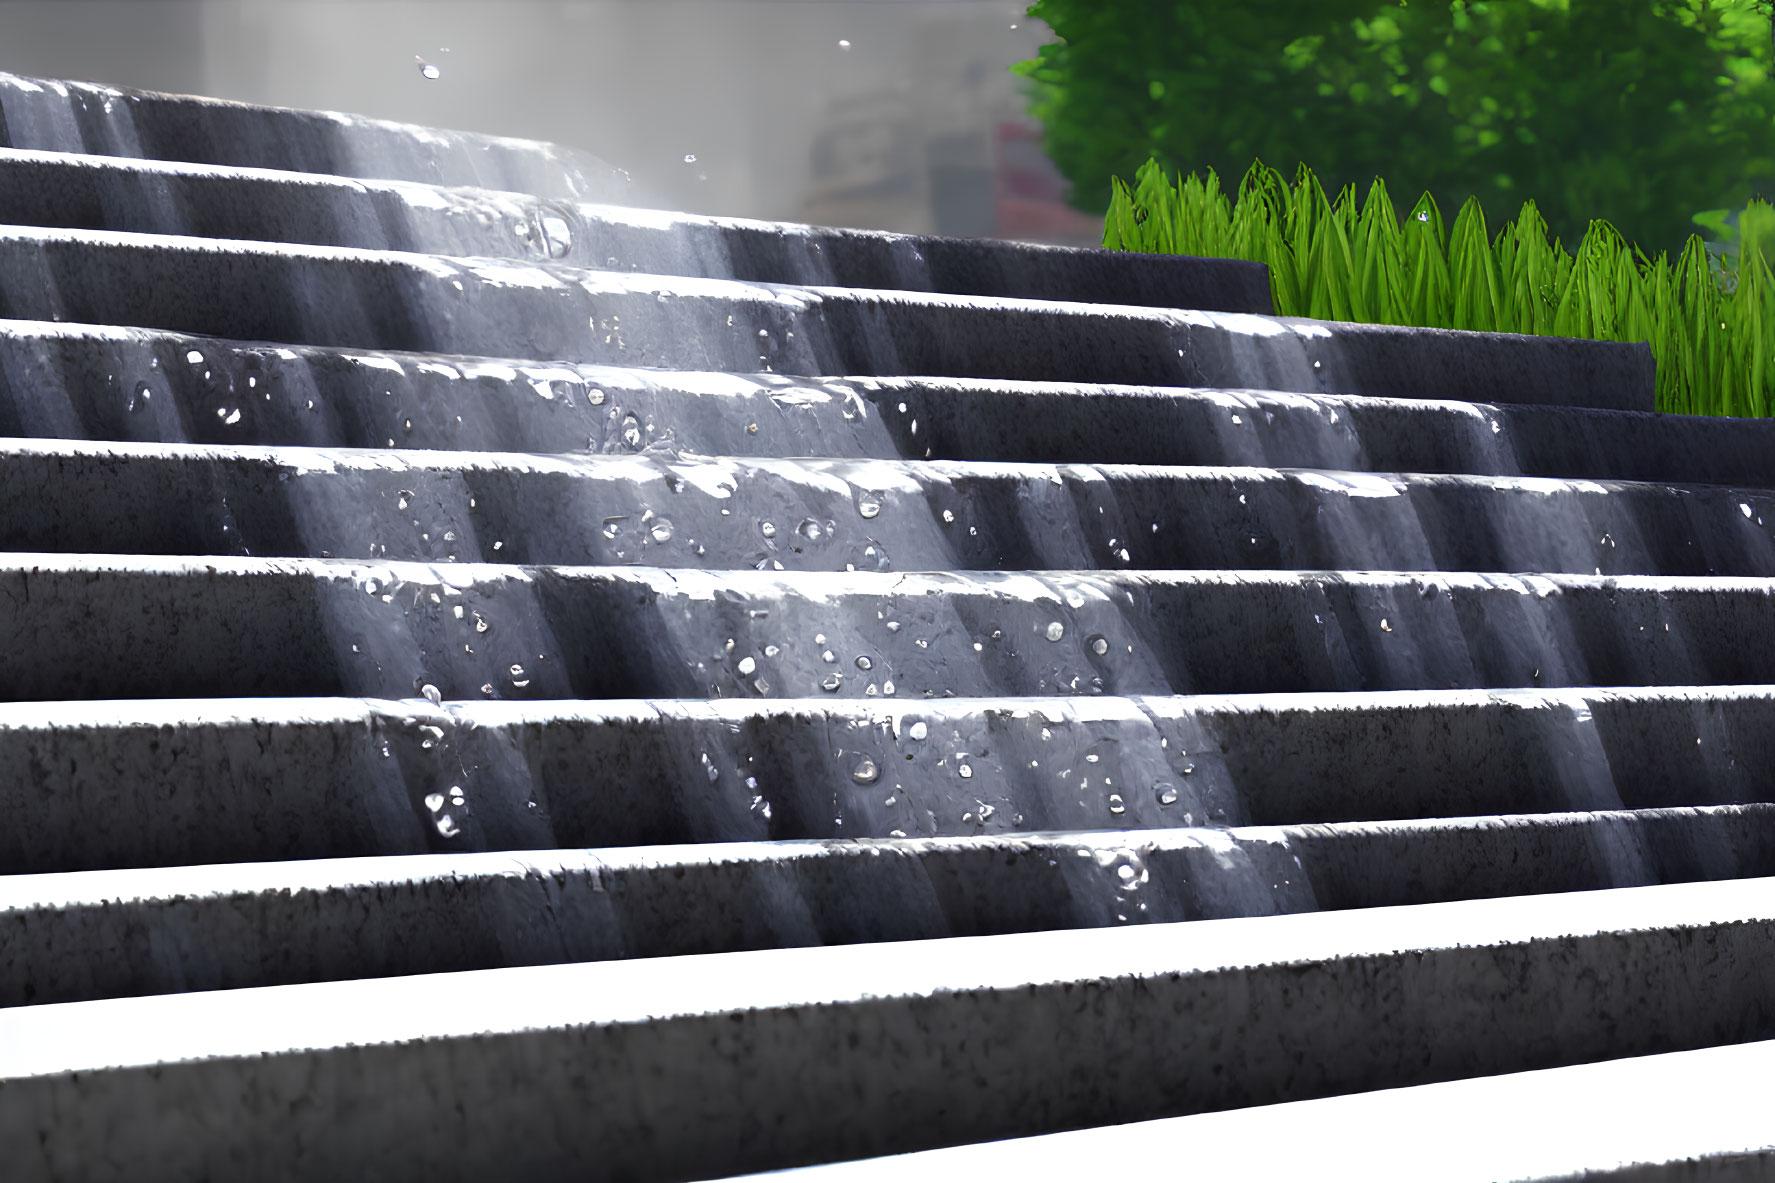 Sunlit wet stair steps with glistening water droplets and green grass.